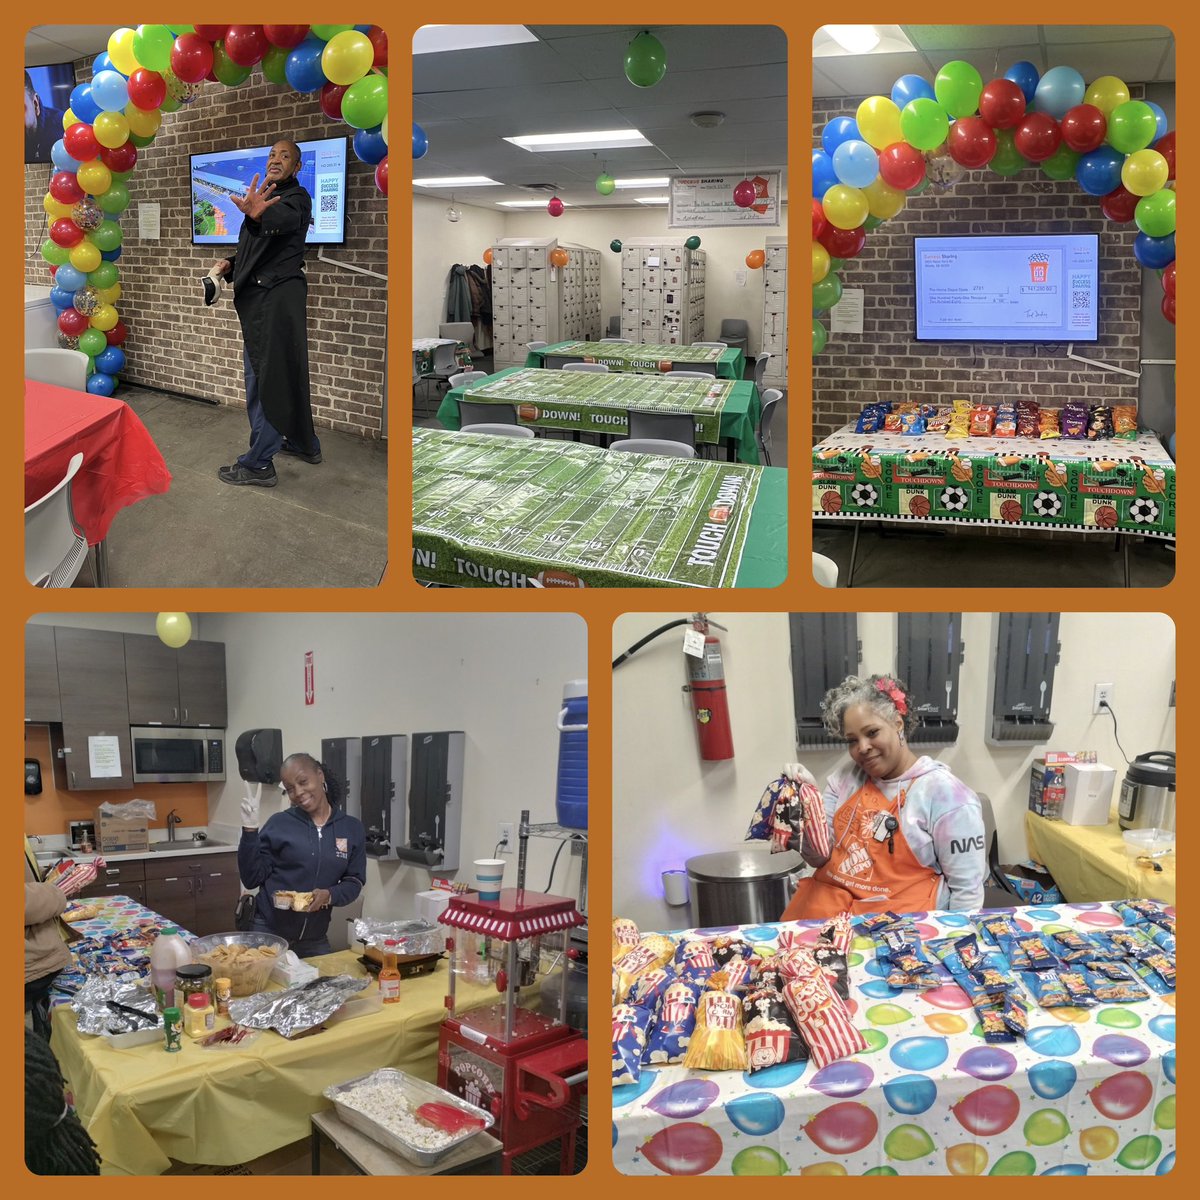 Had a blast during our Success Sharing celebration. Love the excitement and participation. Everyone really had a good time.